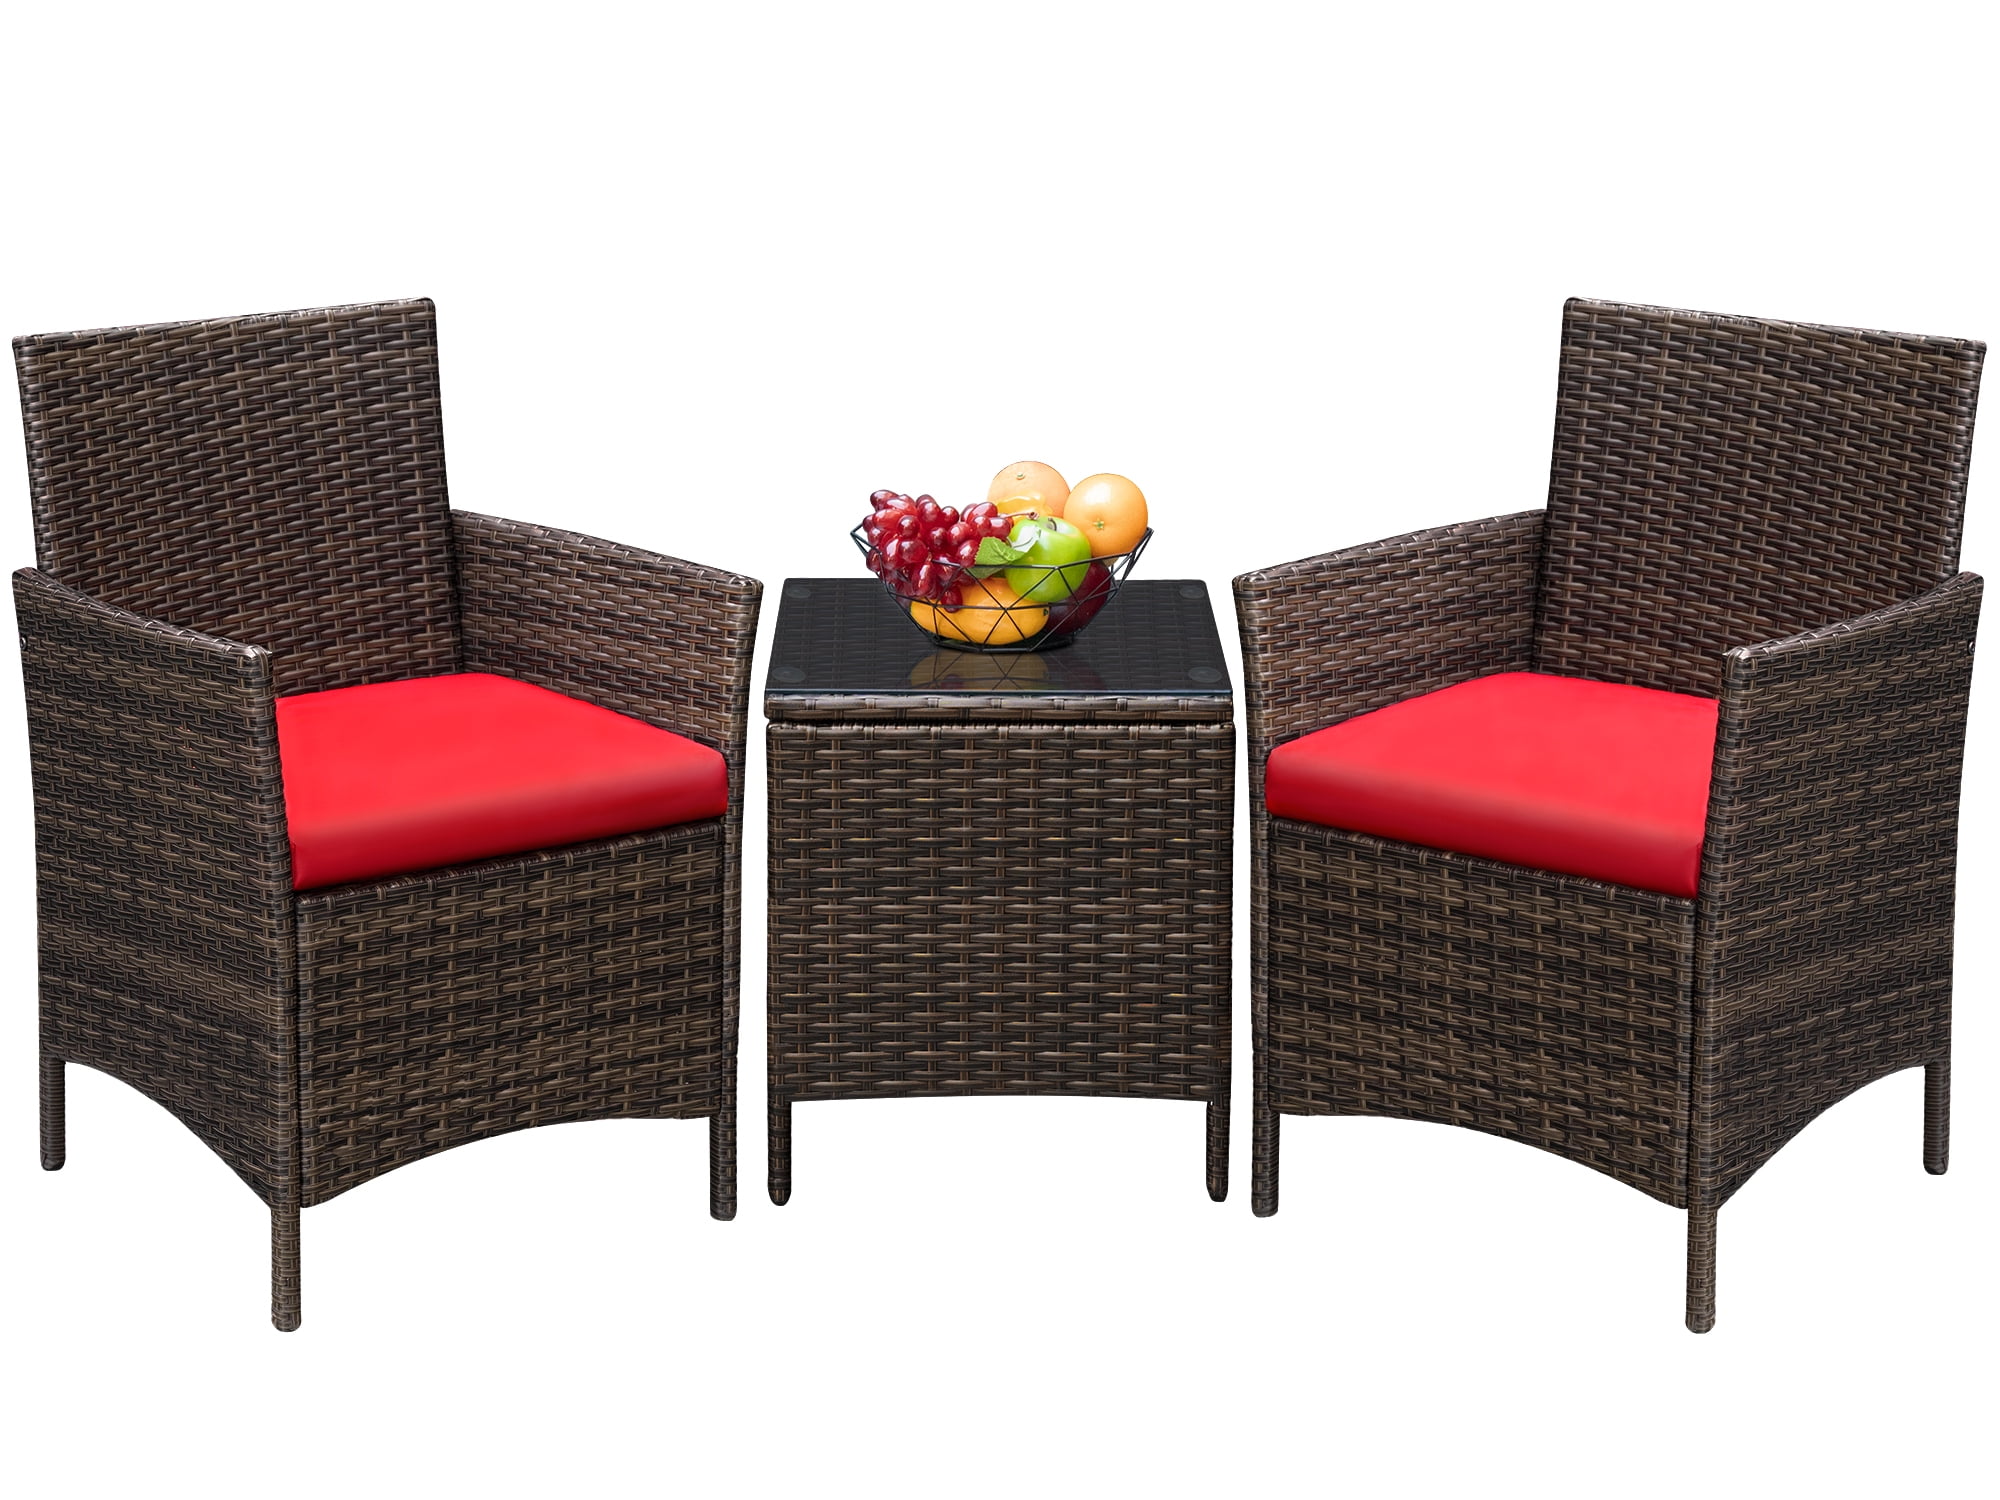 Devoko 3 Pieces Patio Conversation Set PE Rattan Wicker Chairs with Coffee Table, Brown/Red